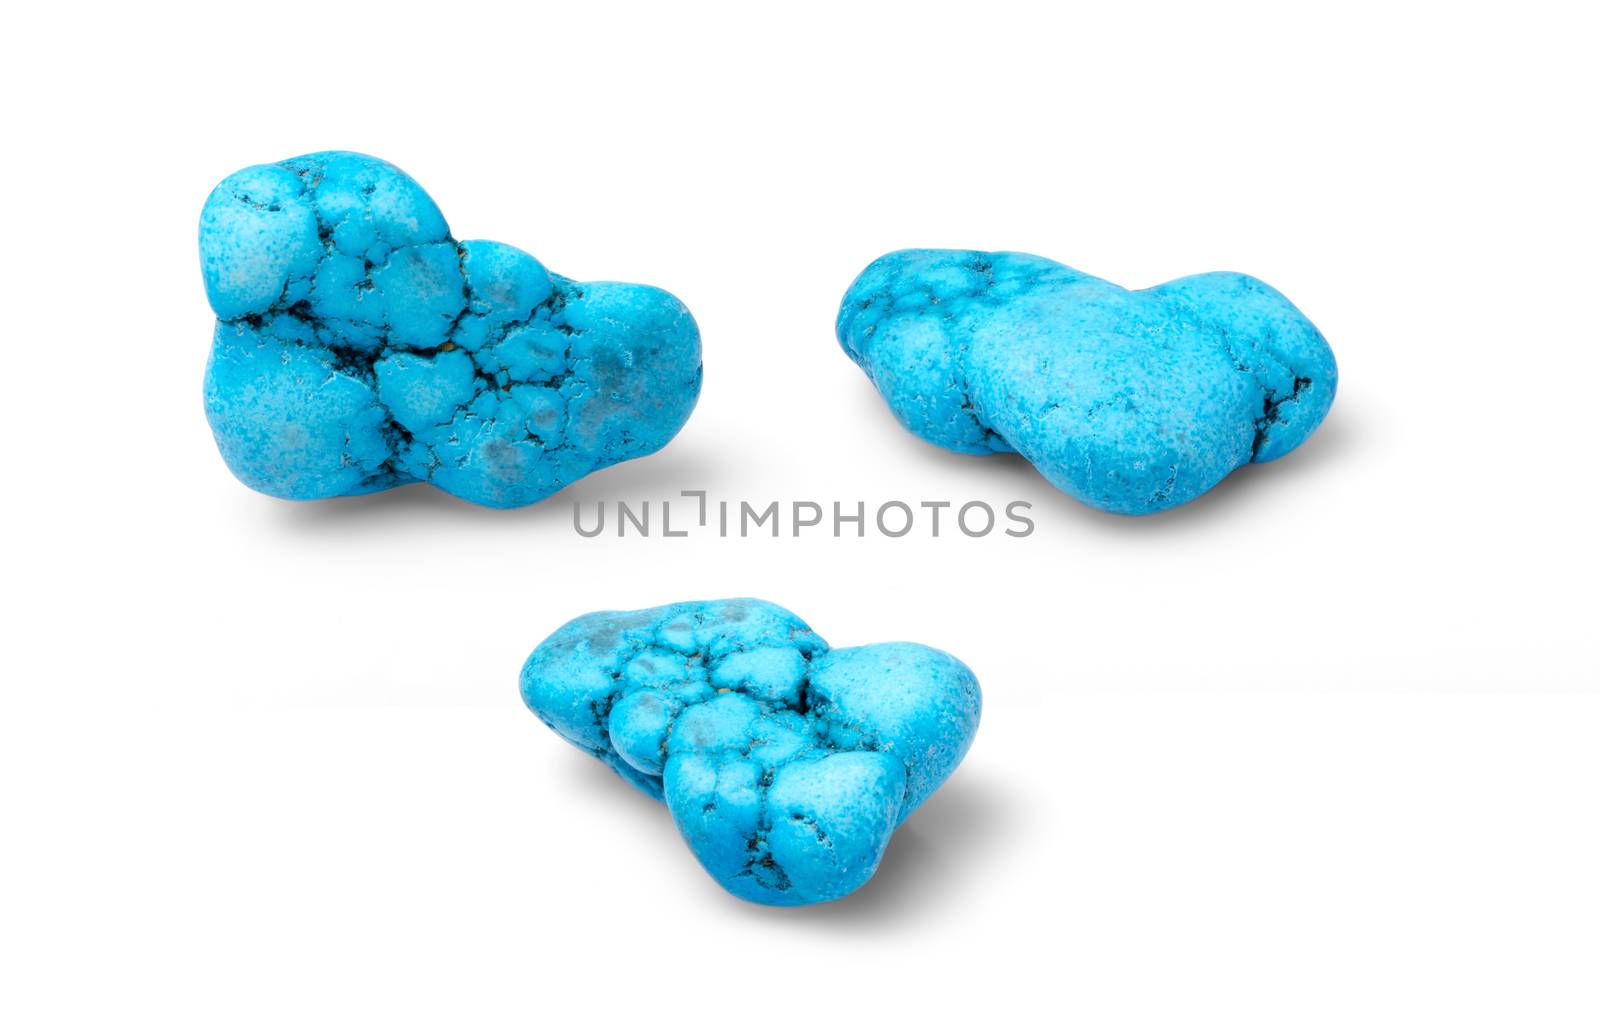 Blue turquoise hawlit shot from thre angles isolated on white background.